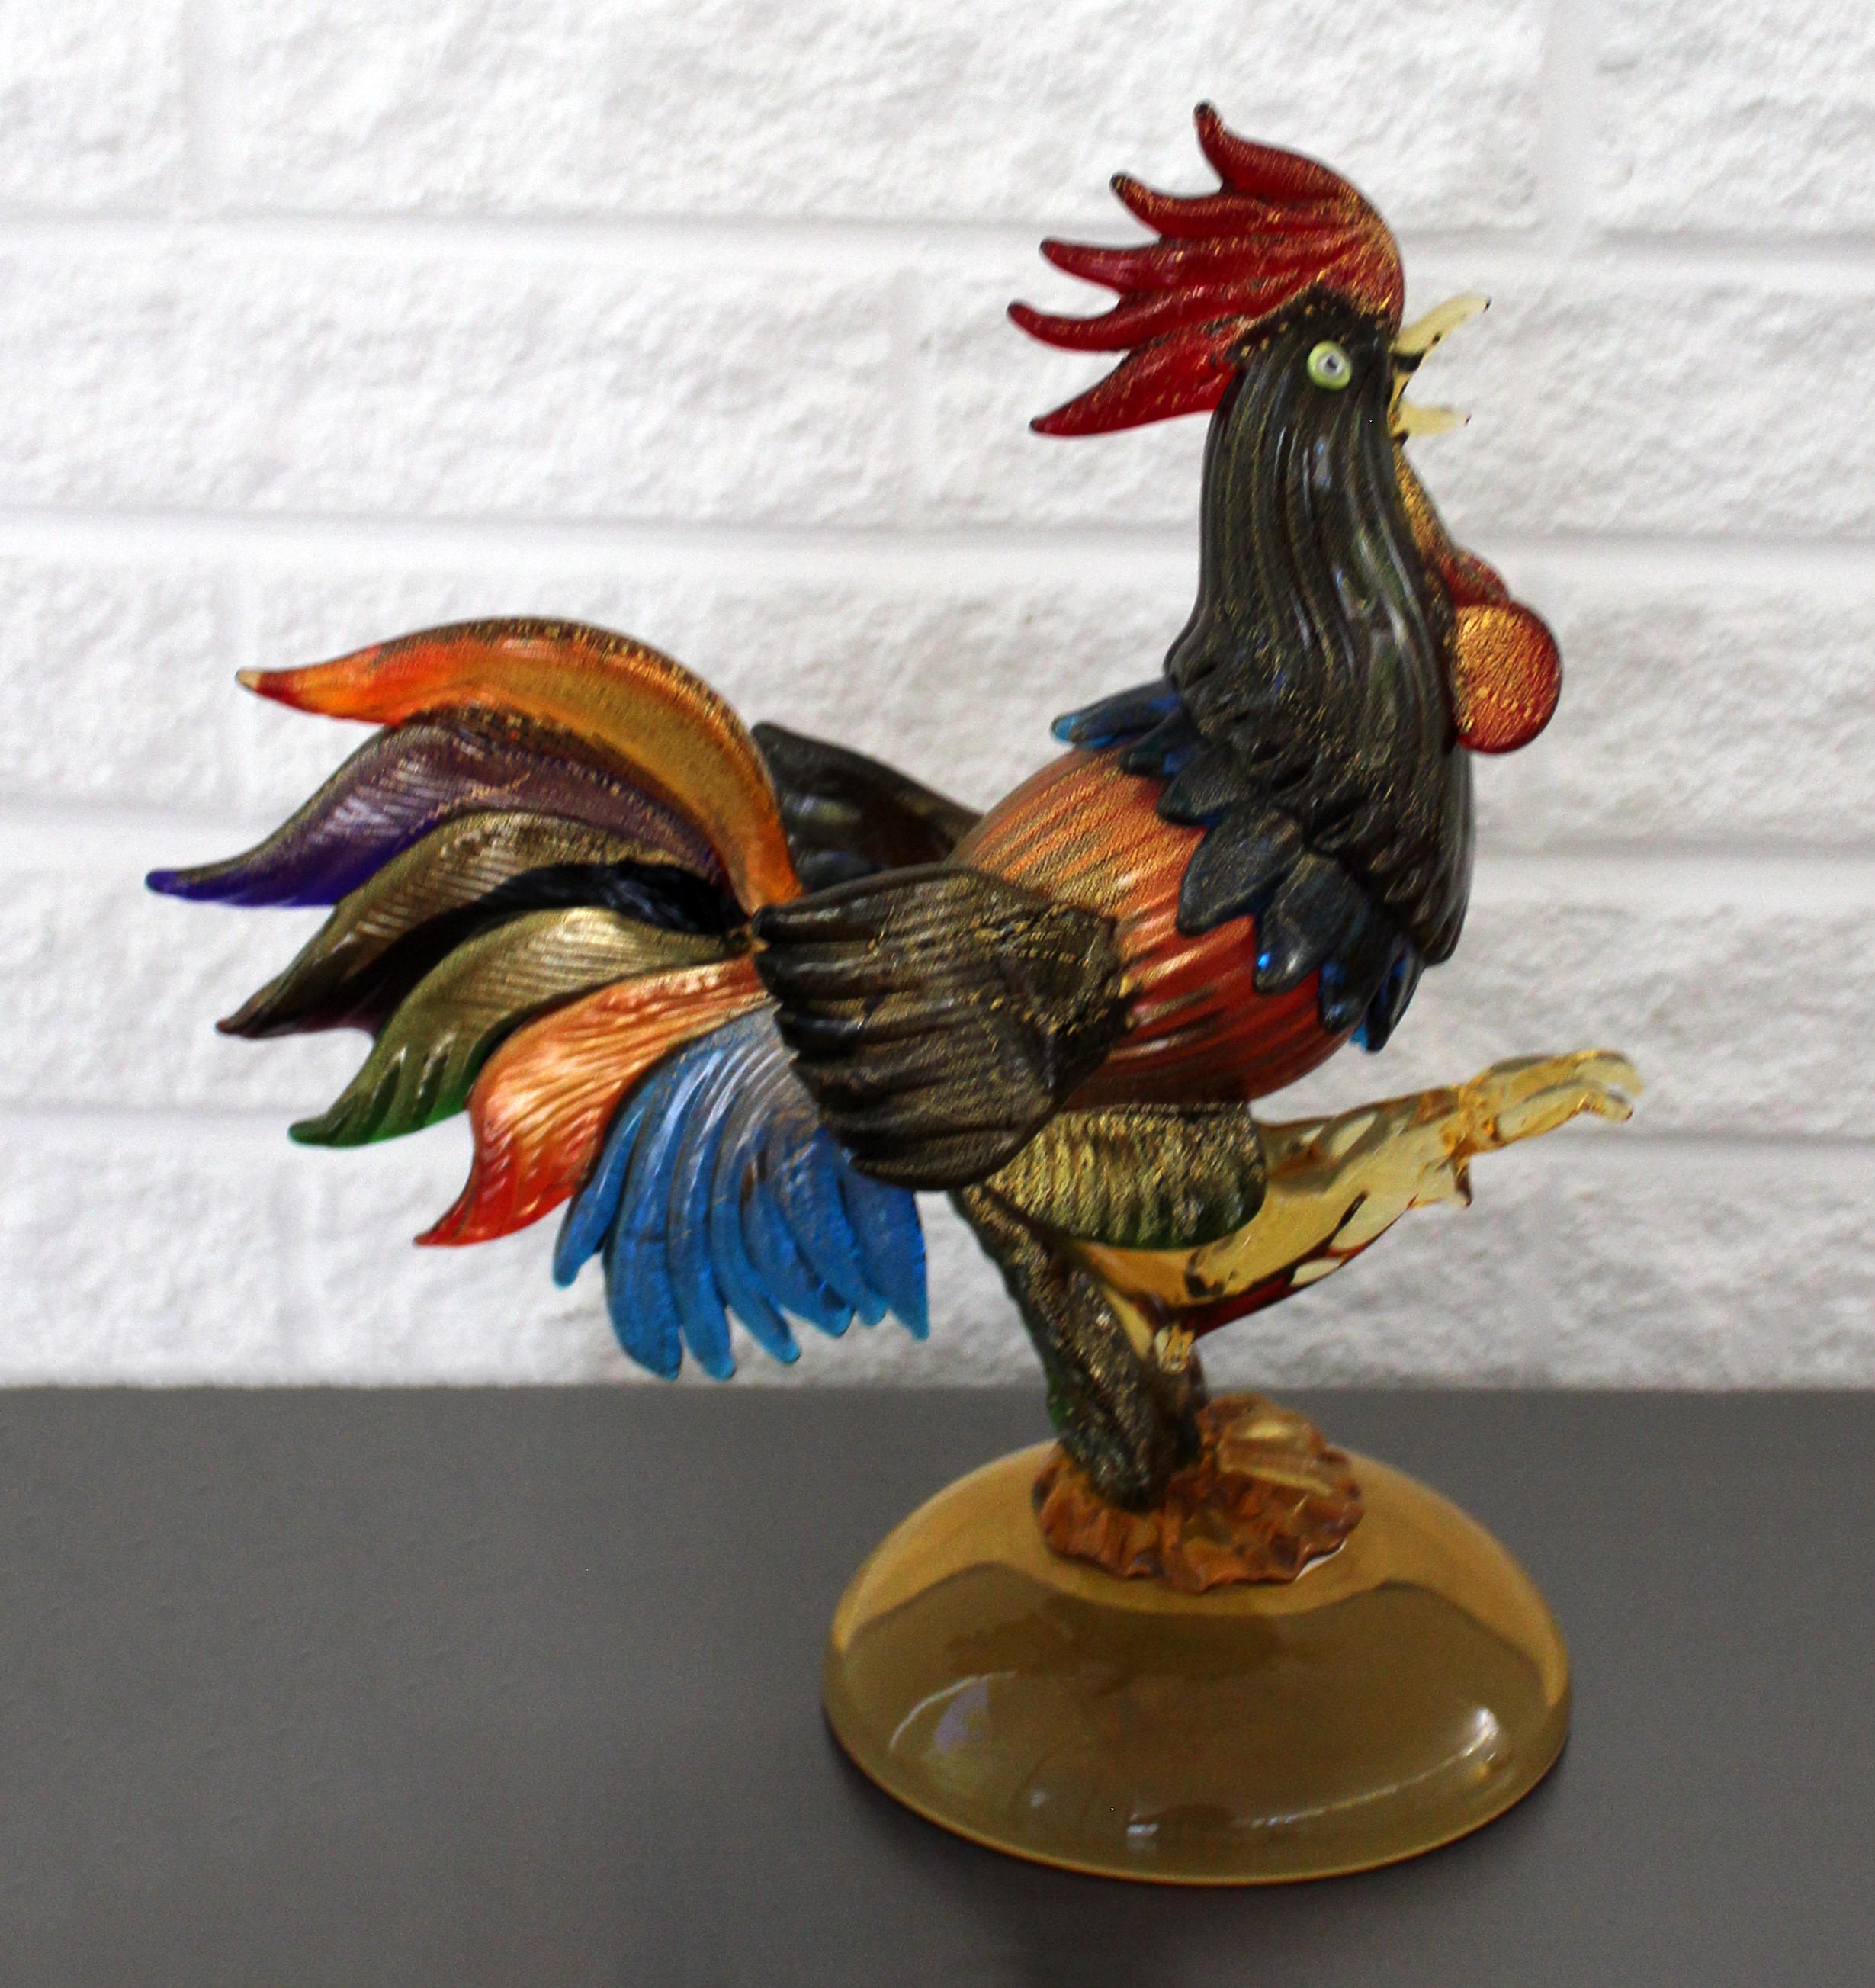 Mid-20th Century Mid-Century Modern Murano Italy Glass Rooster Table Sculpture, 1950s